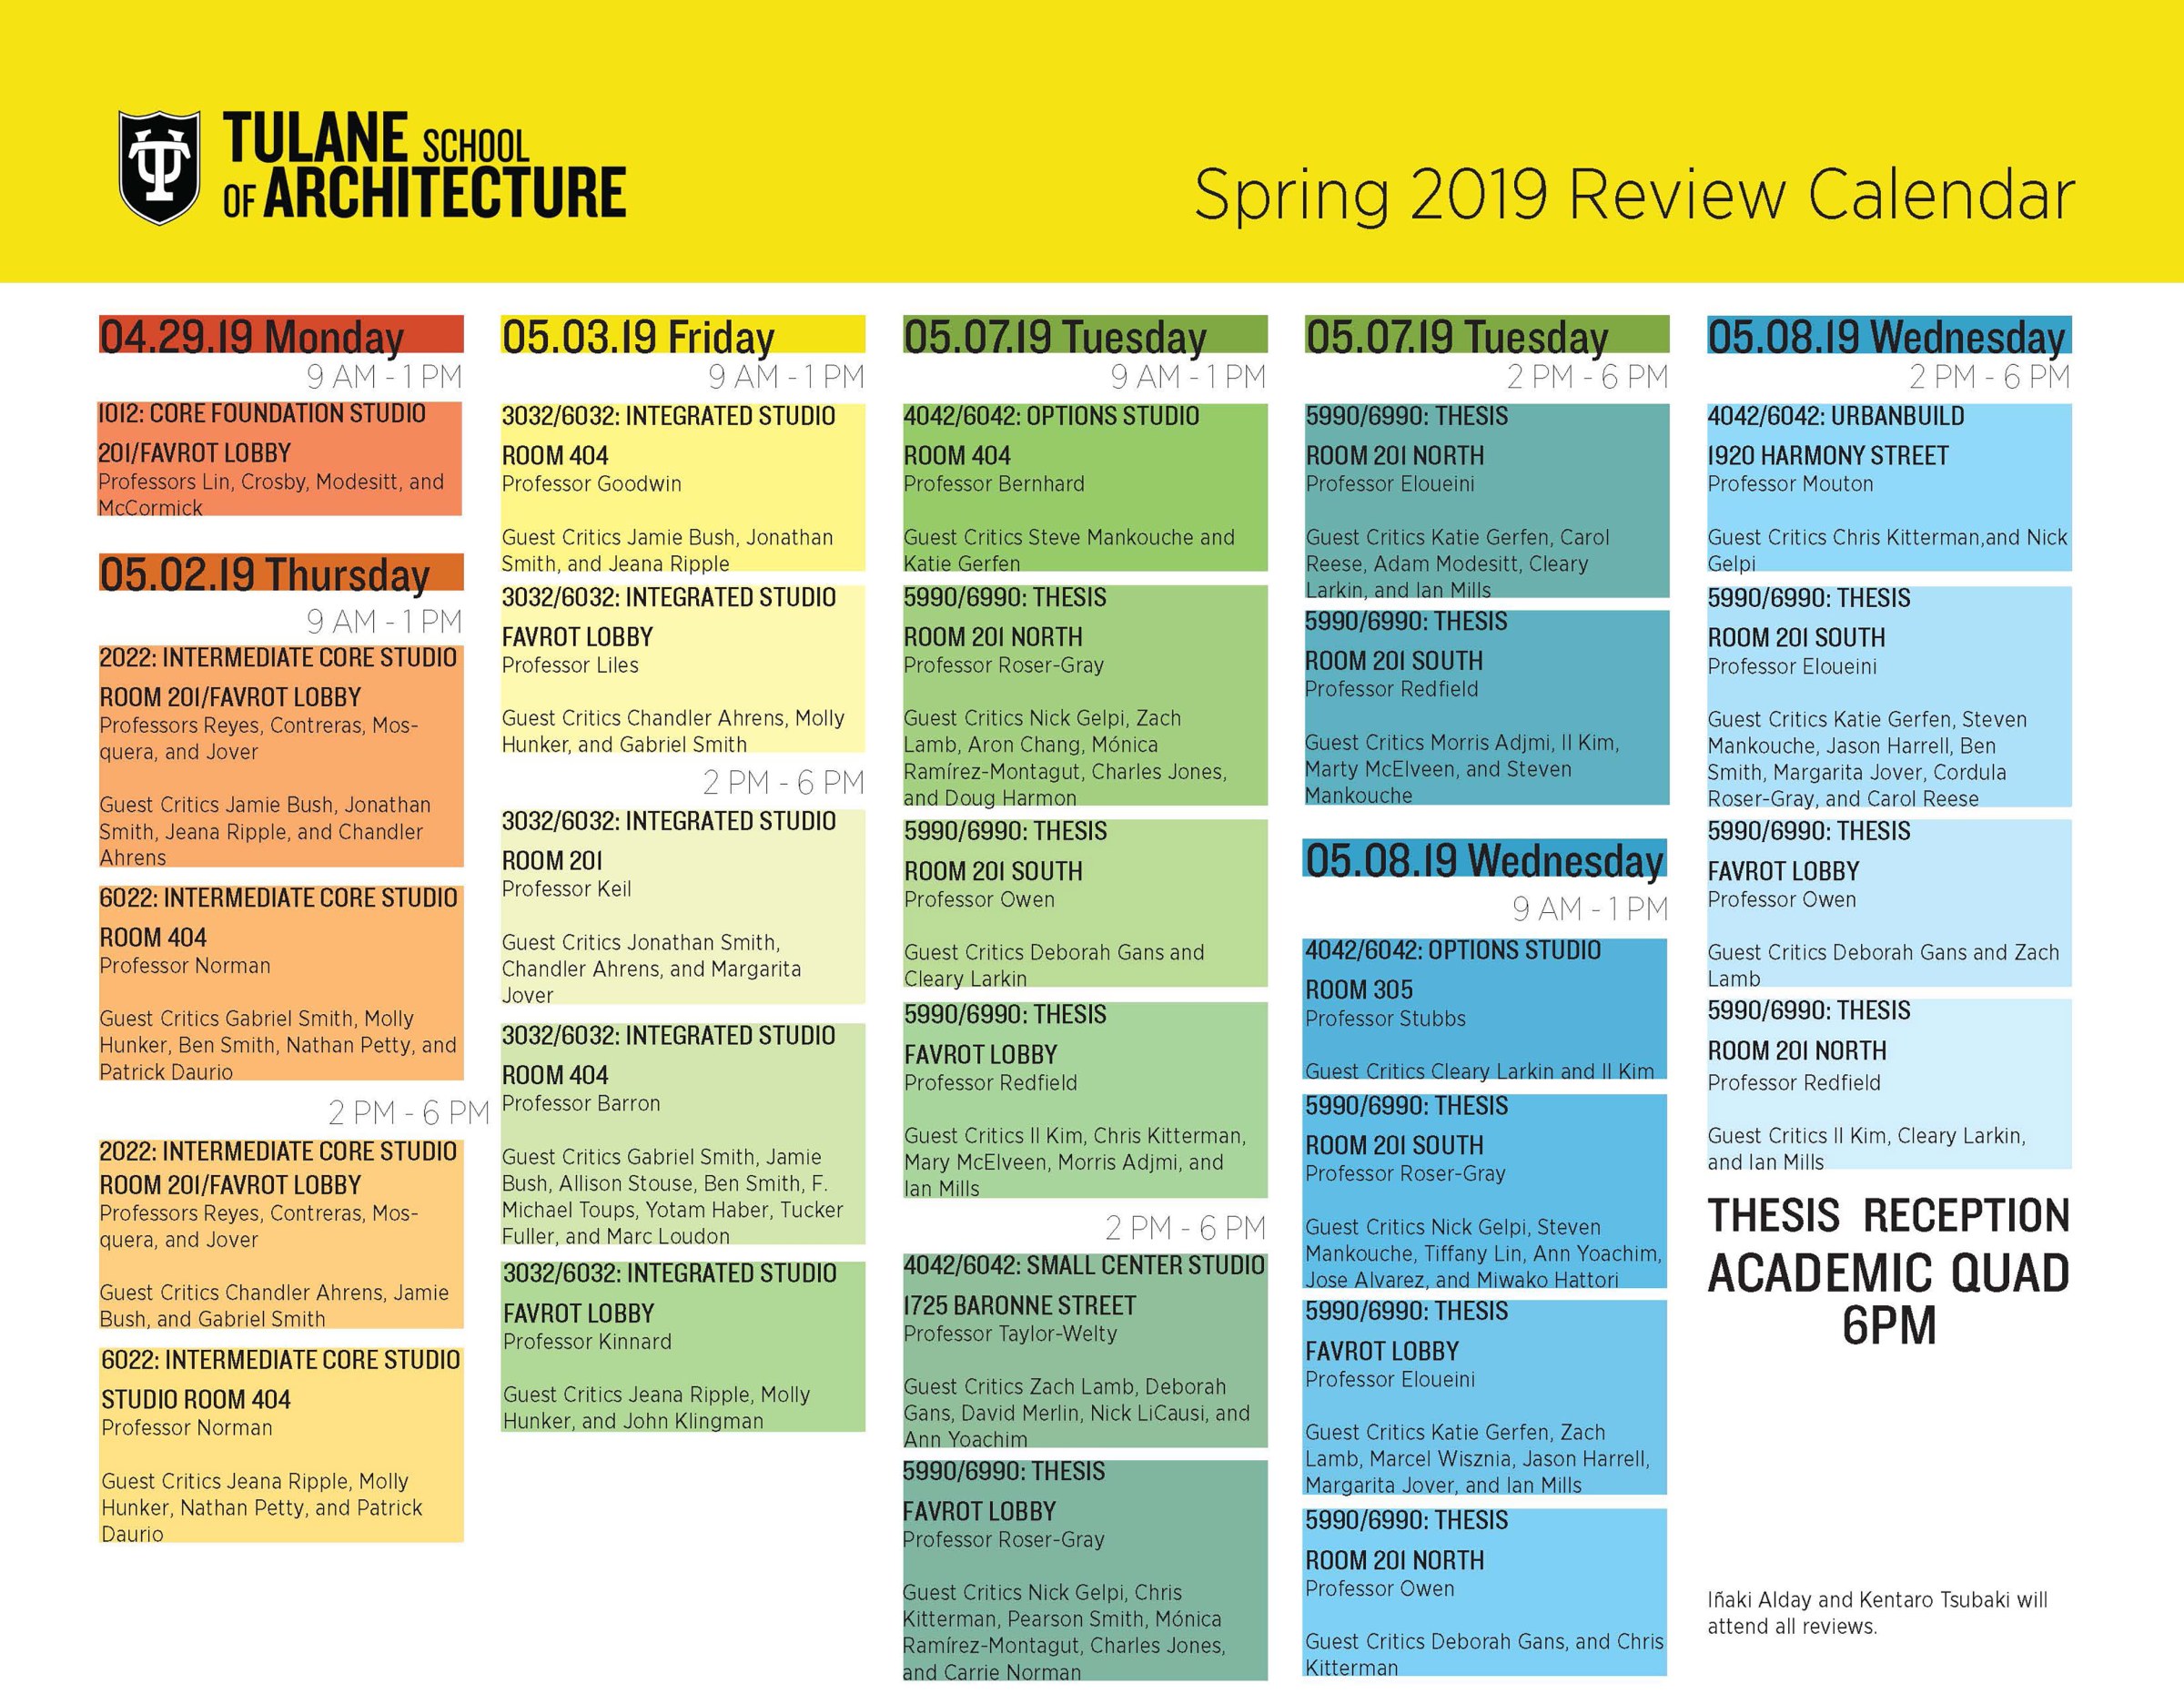 Week calendar color coded displaying final review times